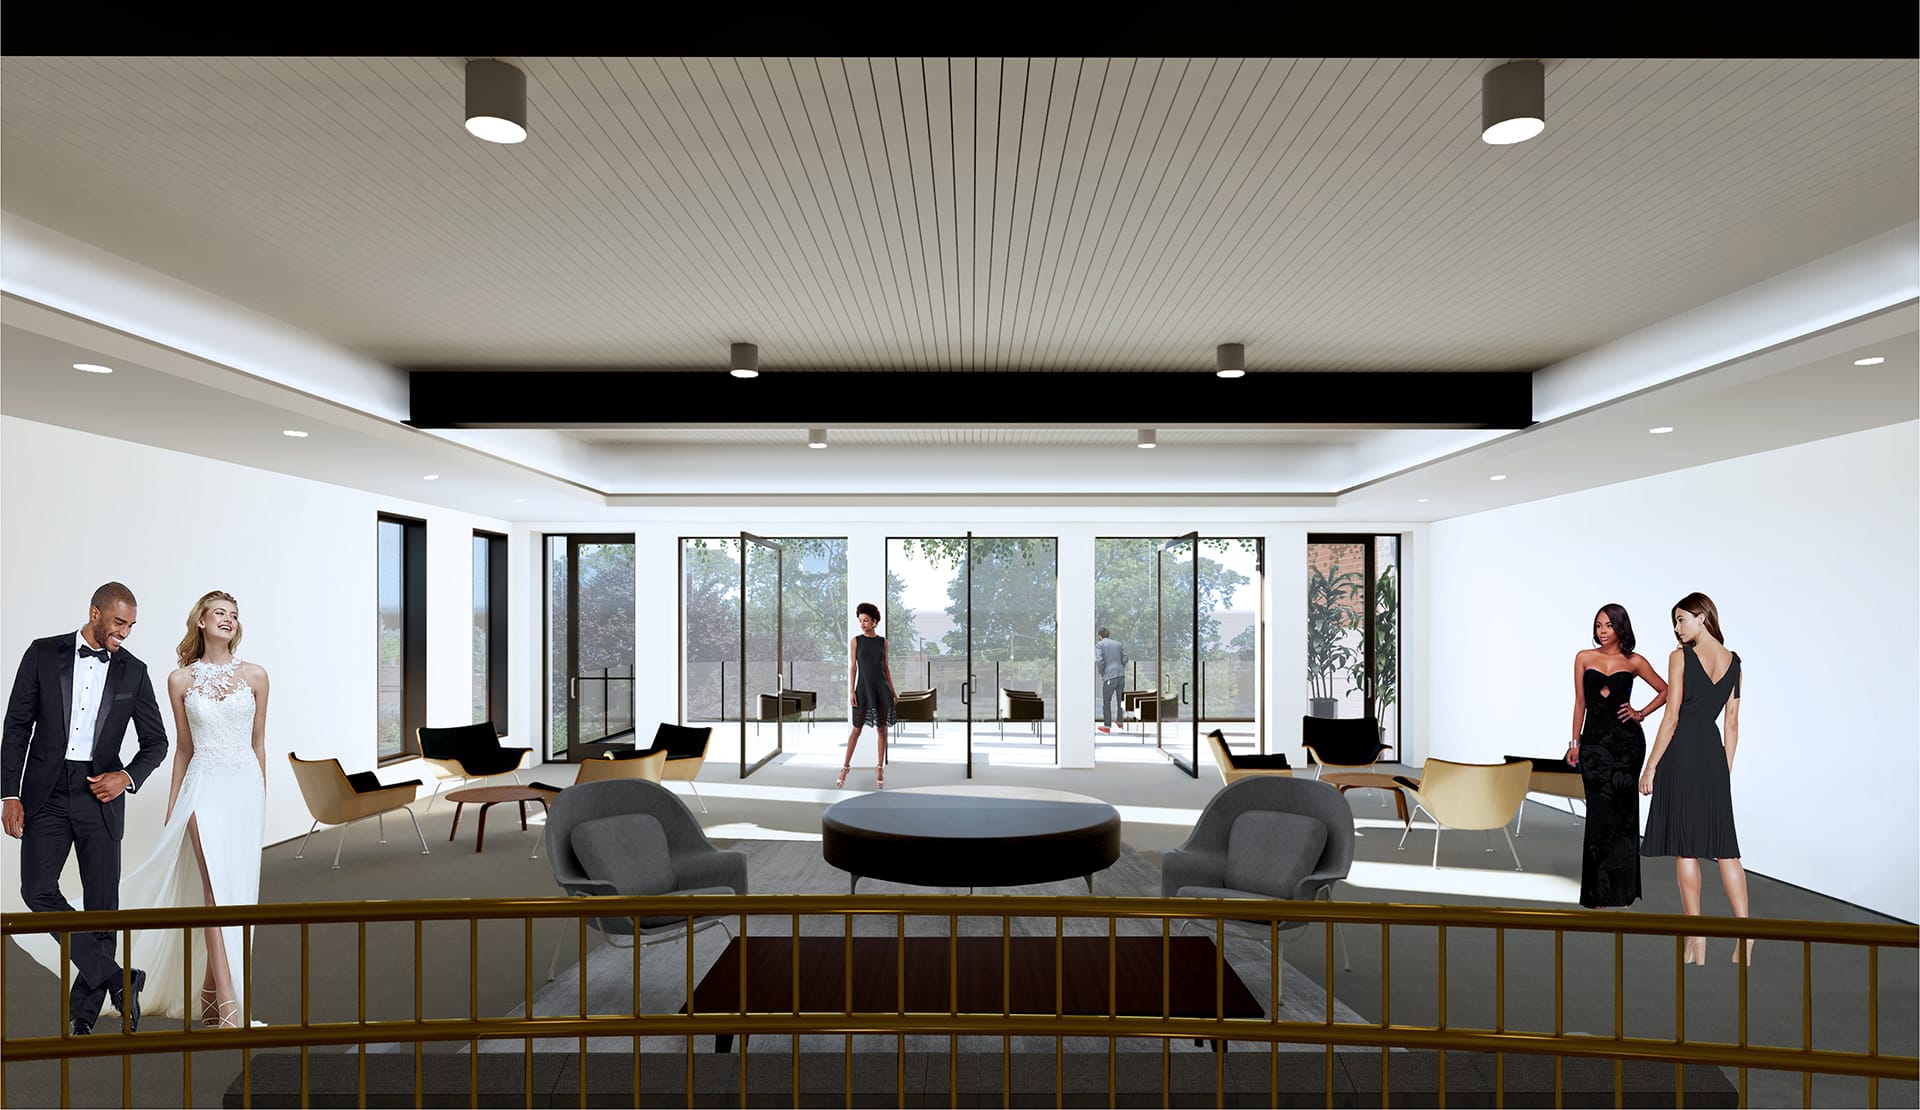 upper interior lounge of dogwood building designed by trivers architectural firm